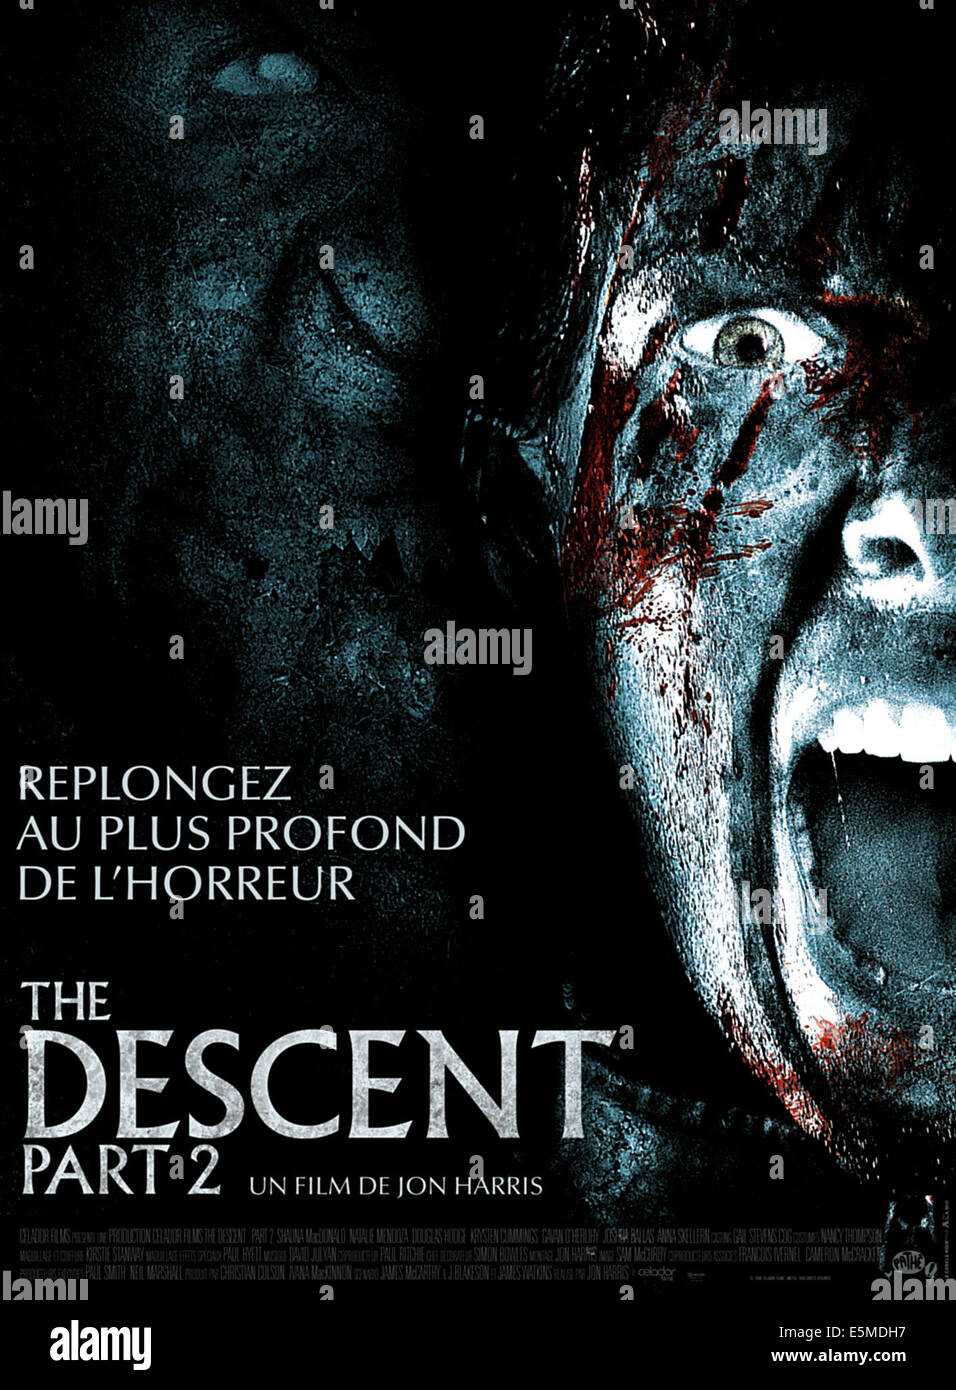 THE DESCENT: PART 2, French poster art, Shauna Macdonald, 2009. ©LionsGate/courtesy Everett Collection Stock Photo